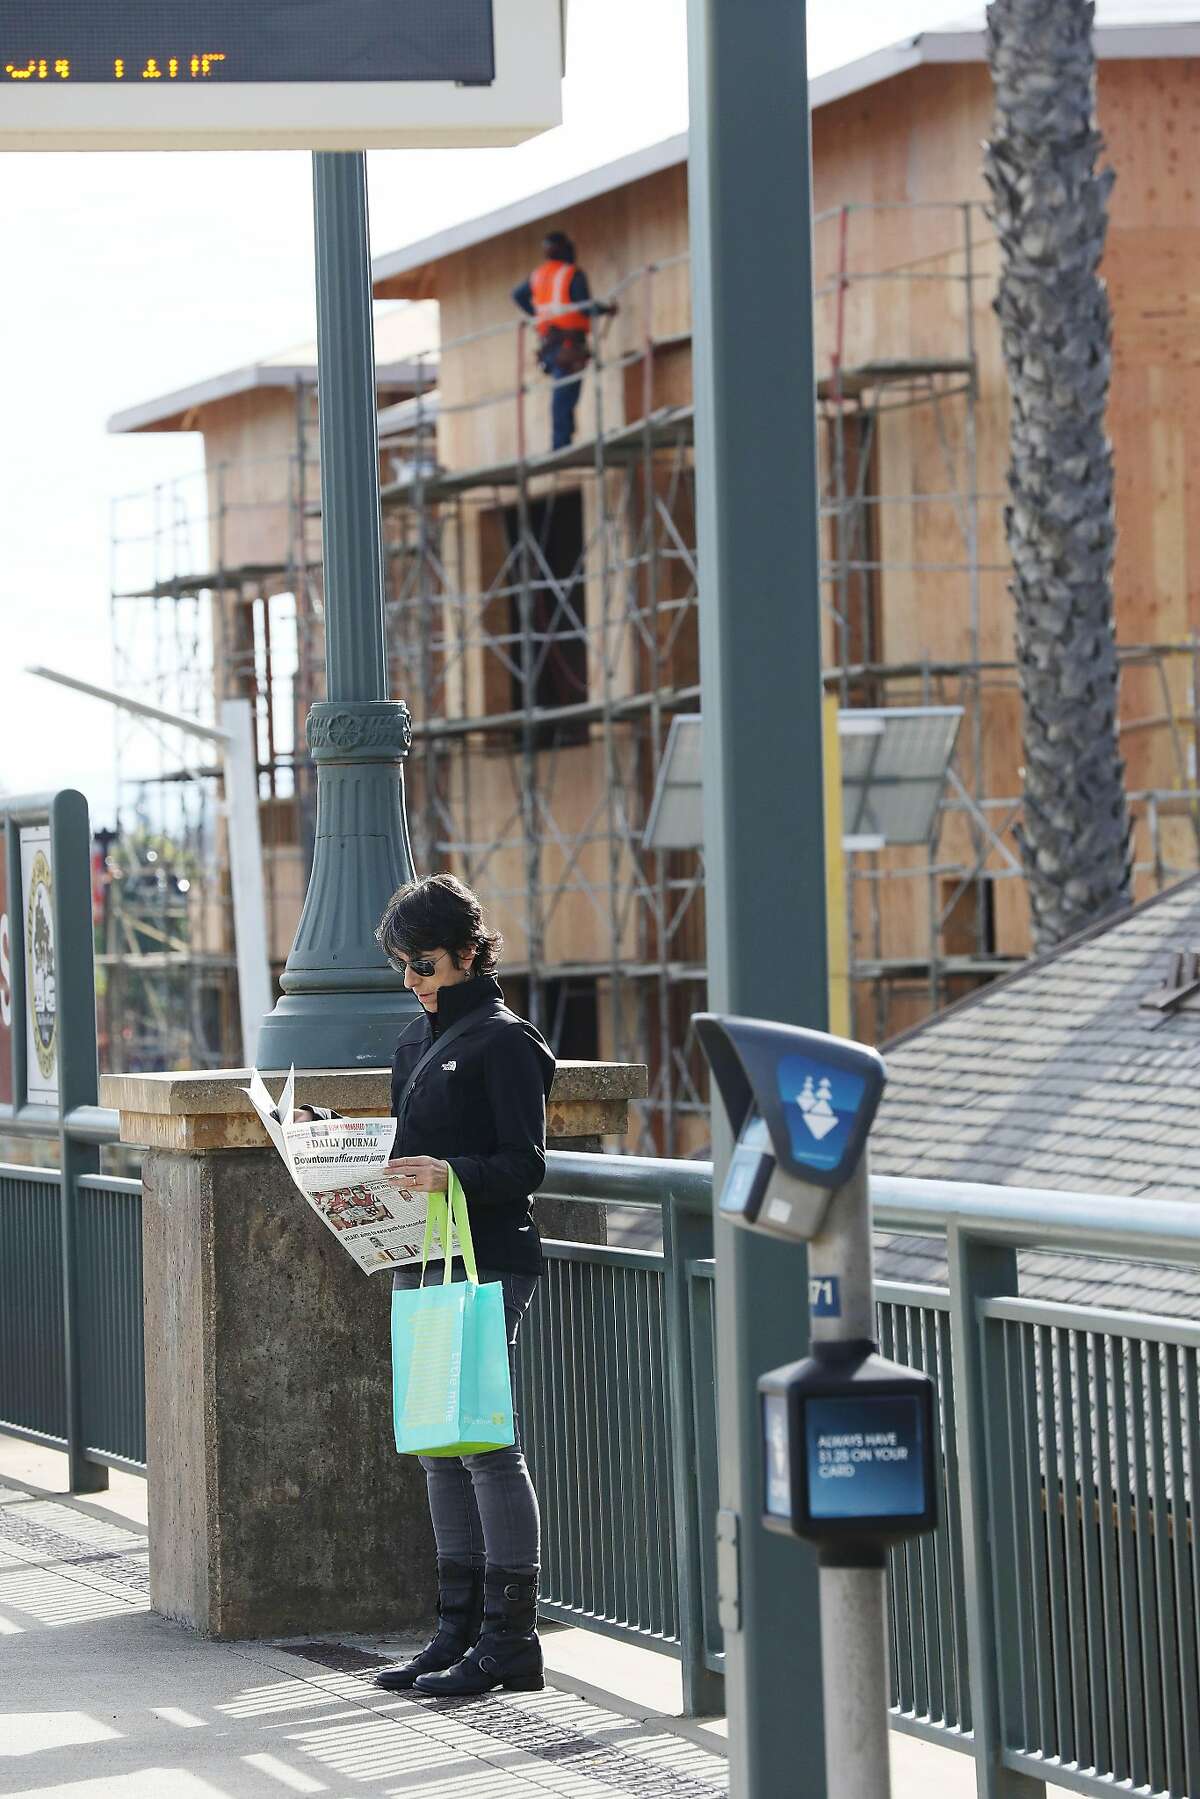 Robin Weiss of San Carlos waits for a train at the San Carlos Caltrain station while behind her new construction on El Camino Real can be seen on Monday, December 3, 2018 in San Carlos, Calif.